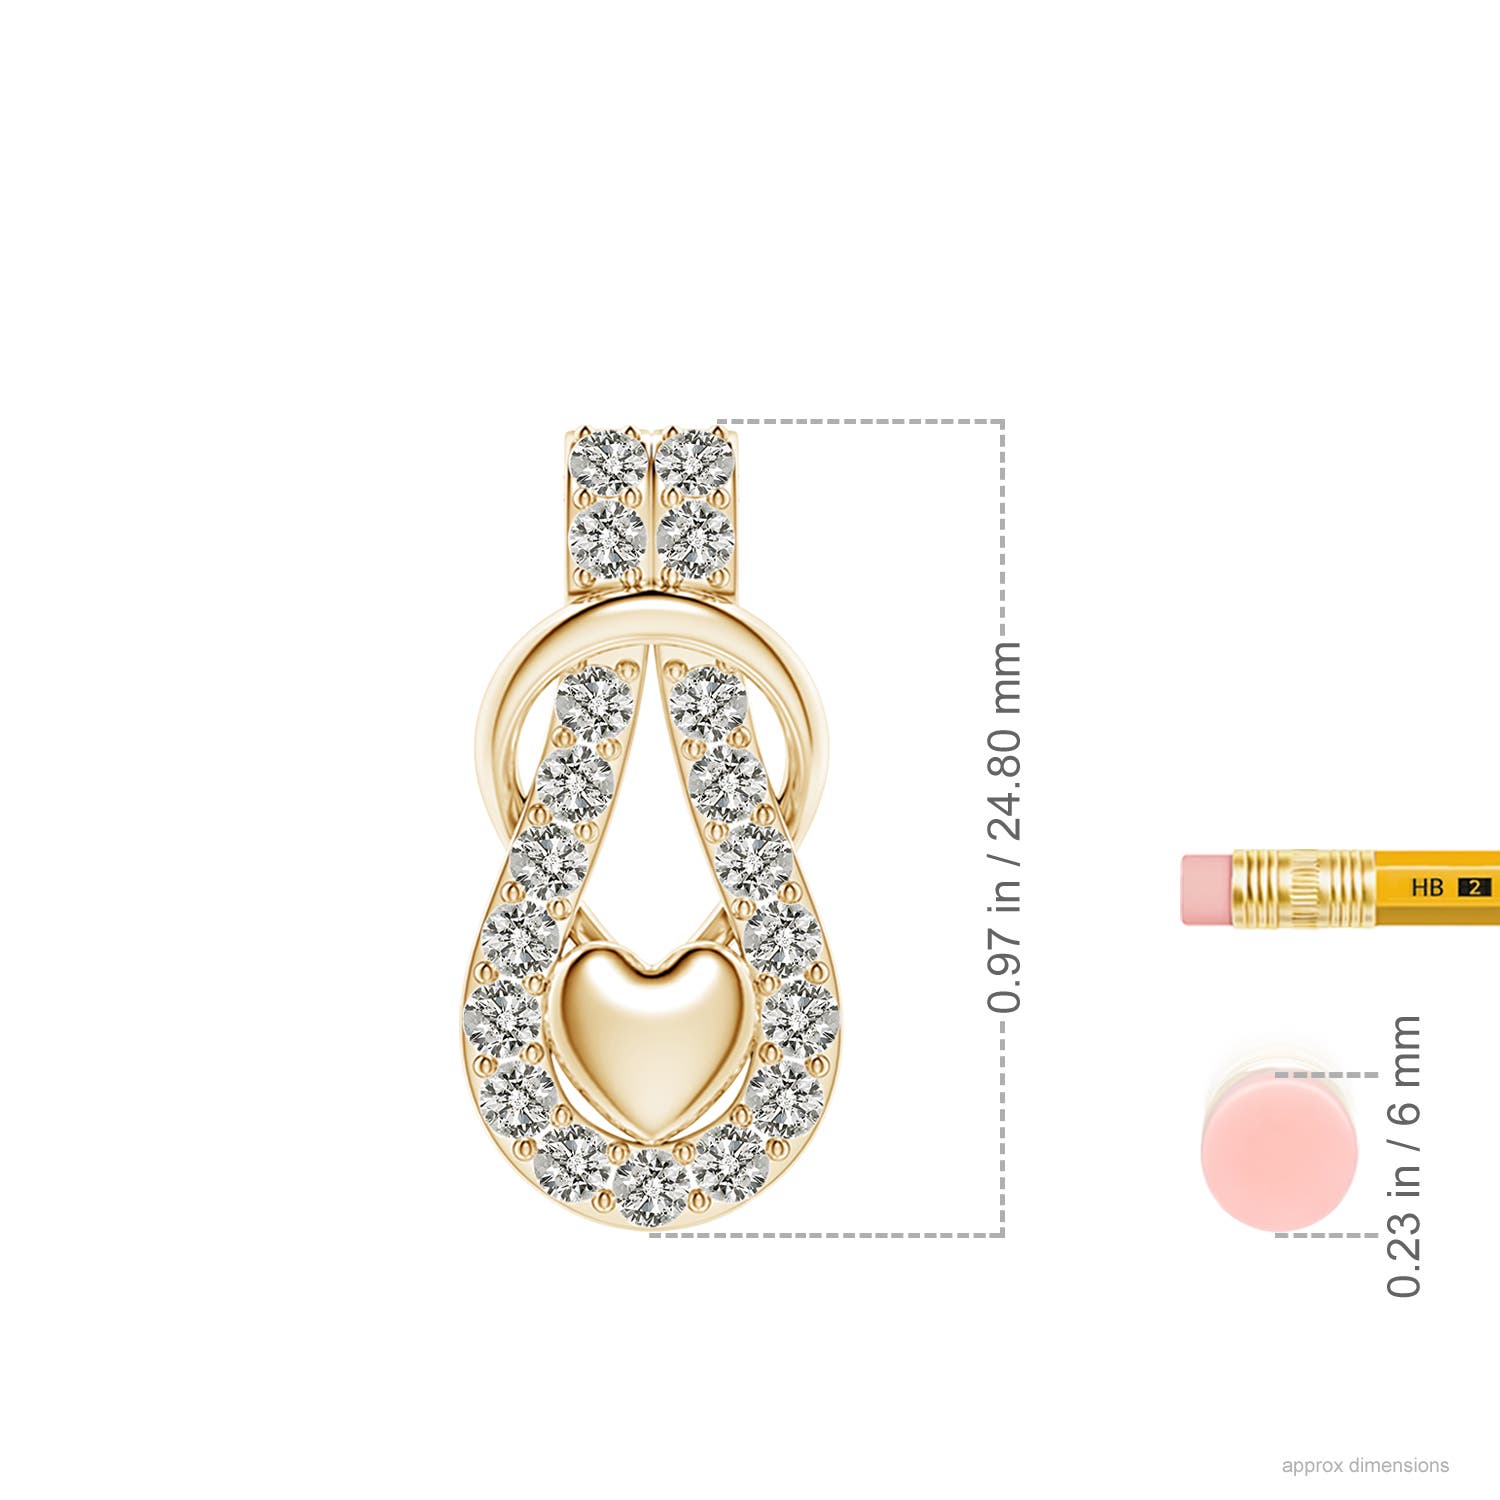 K, I3 / 0.99 CT / 18 KT Yellow Gold